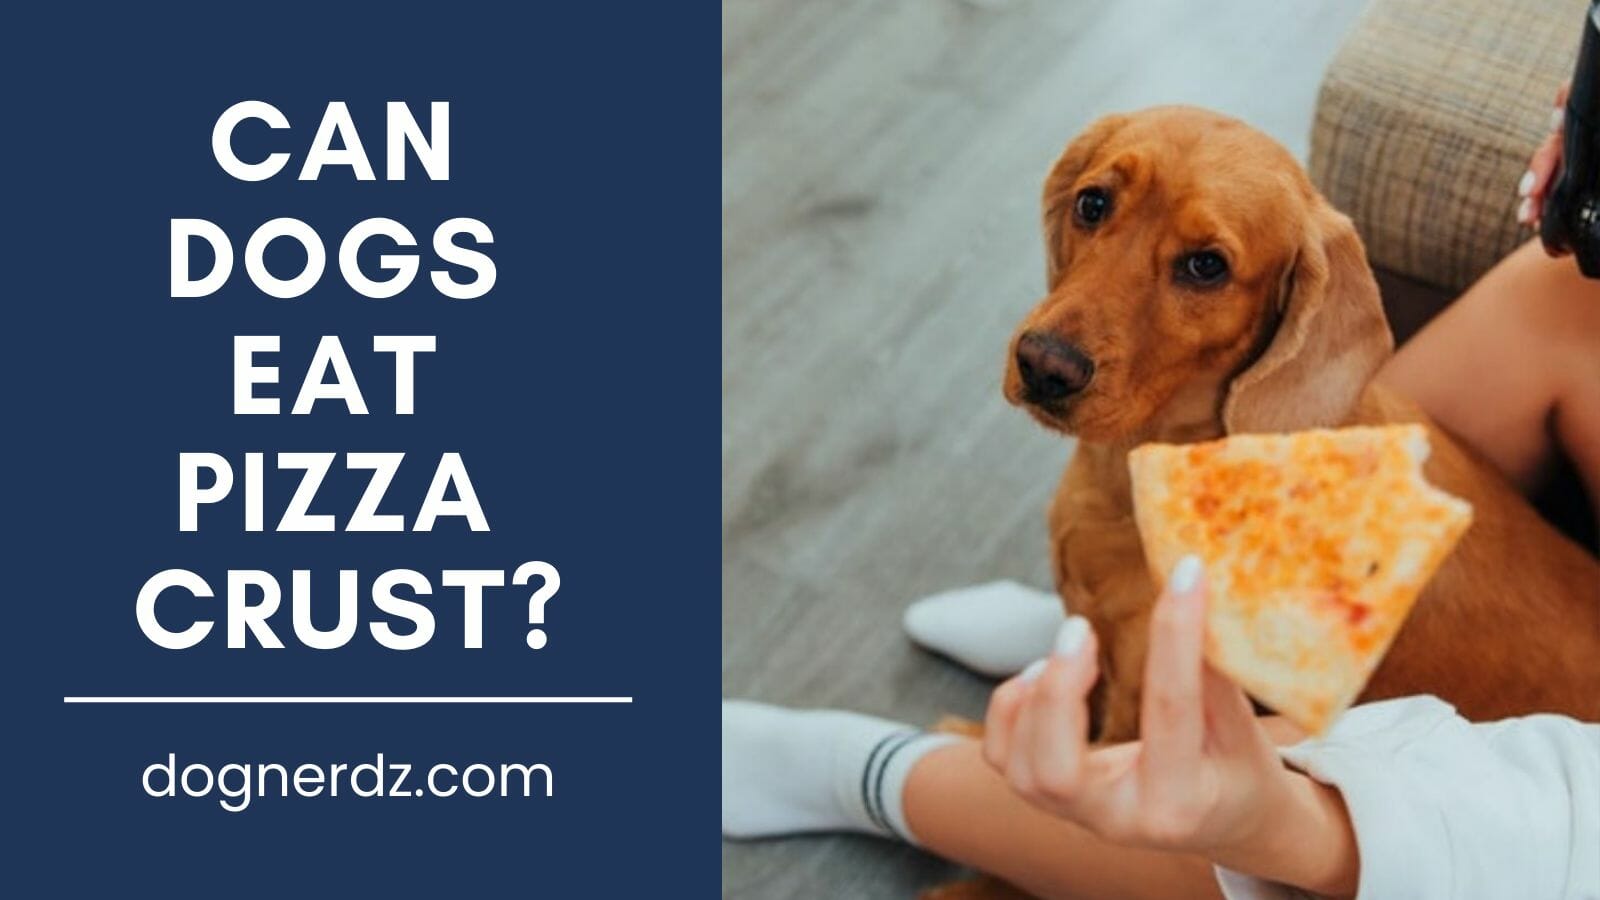 can dogs eat pizza crust?